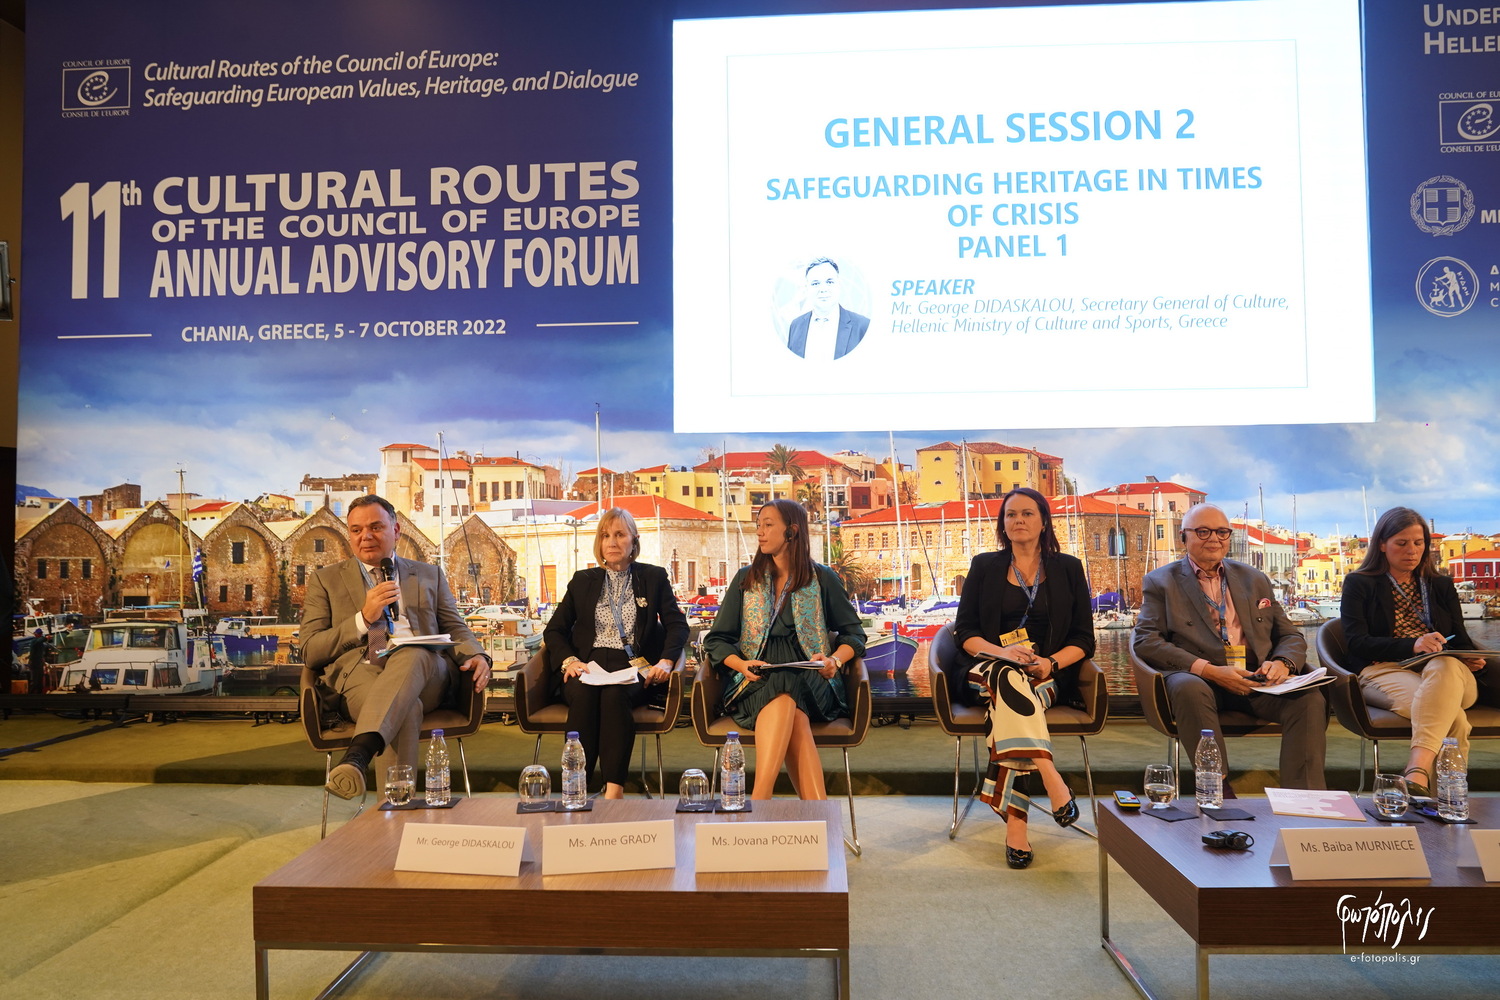 General session 2 panel 1: Safeguarding heritage in times of crisis